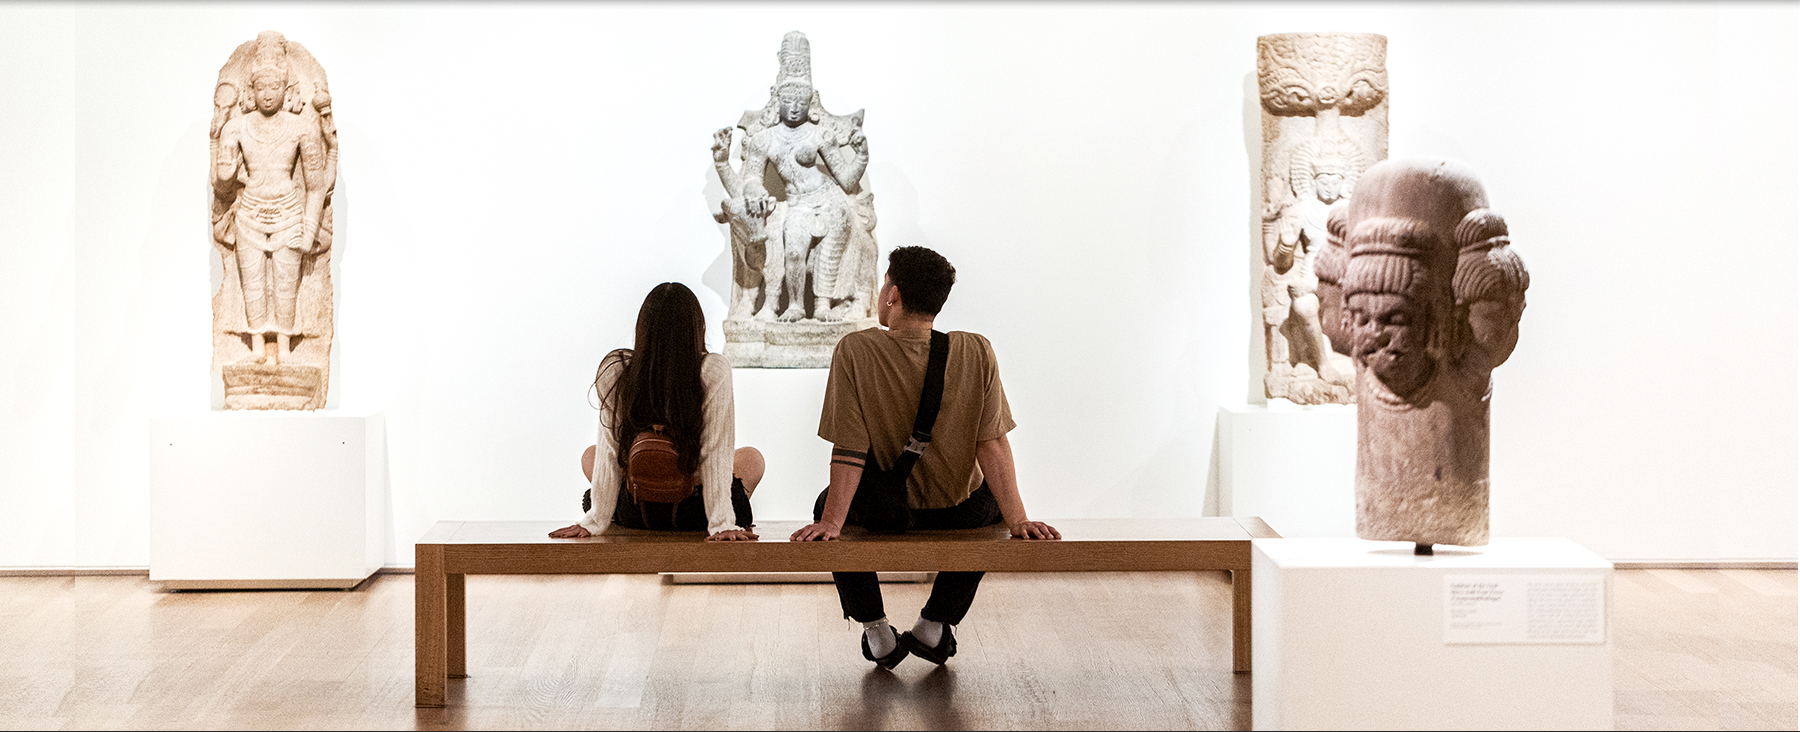 Two Loyola students sitting in front of artwork at the Art Institute of Chicago